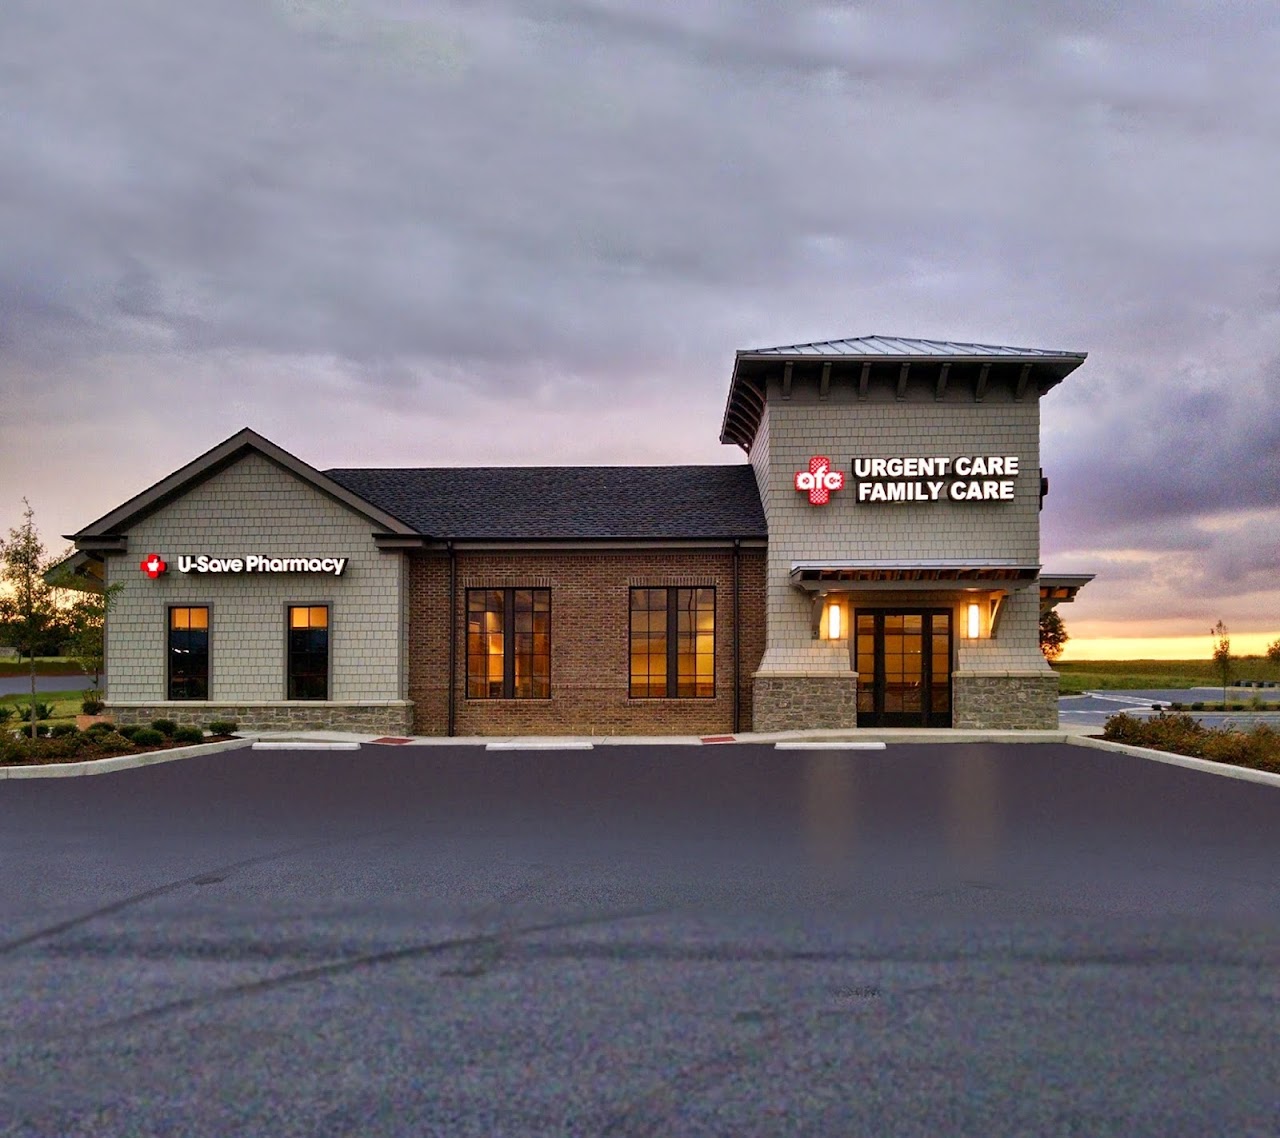 Photo of AFC Urgent Care Spring Hill COVID Testing at 2070 Wall St, Spring Hill, TN 37174, USA